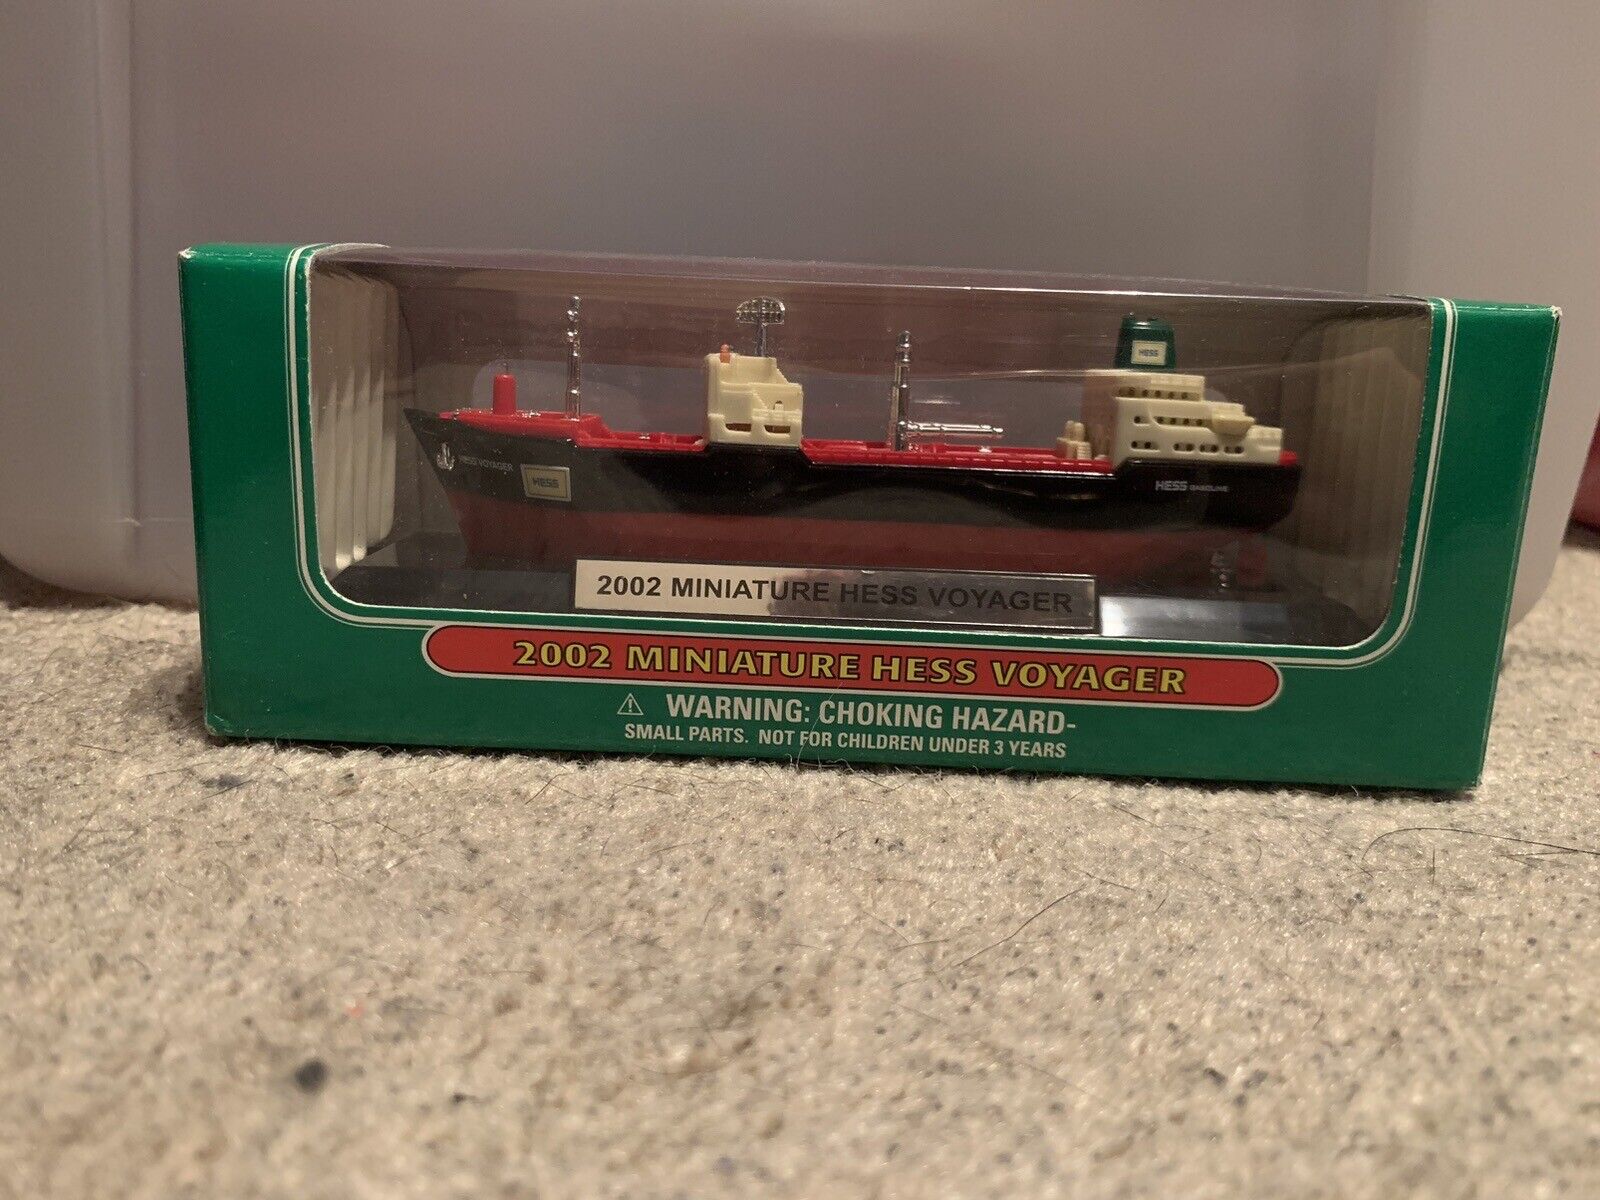 BRAND NEW 2002 MINIATURE HESS VOYAGER